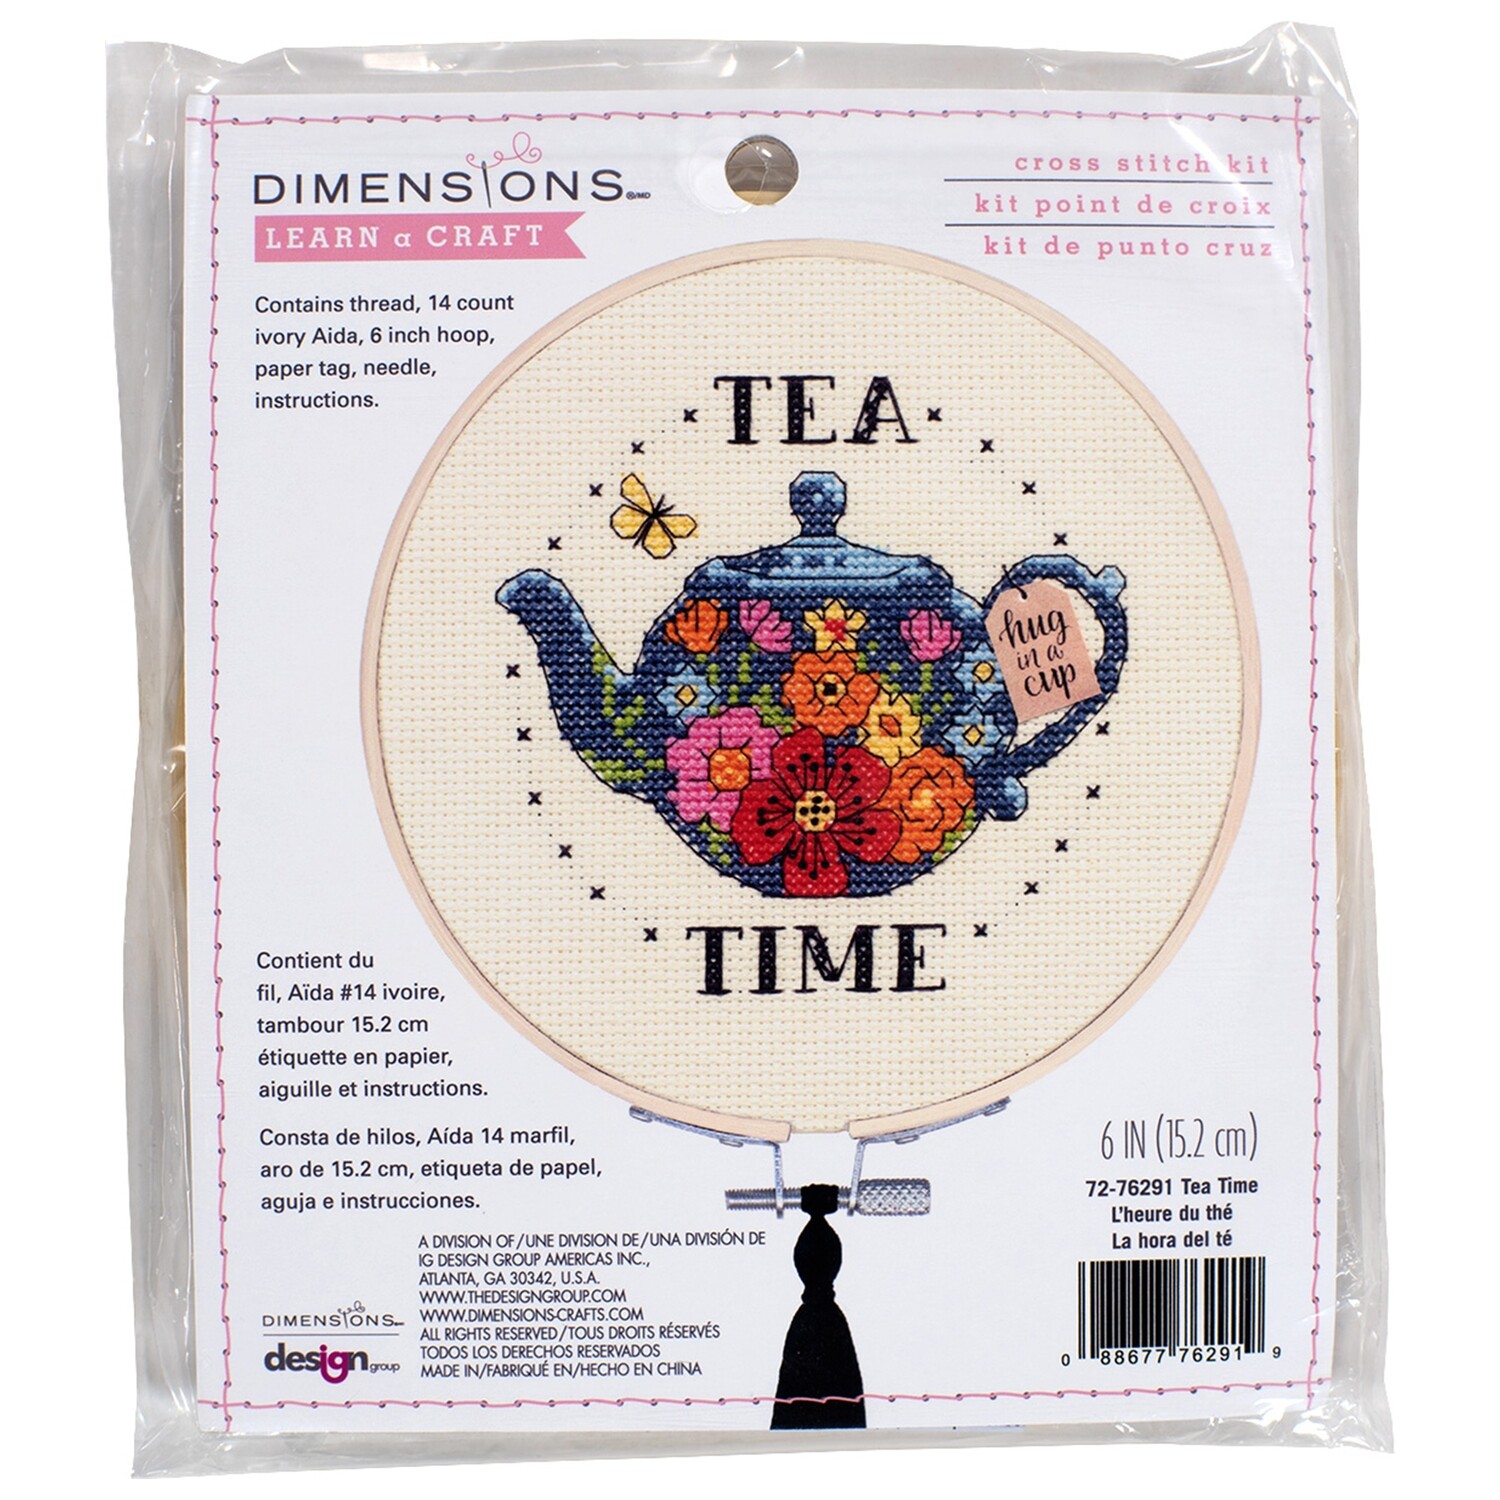 Counted Cross Stitch Kit With Hoop: "Tea Time"